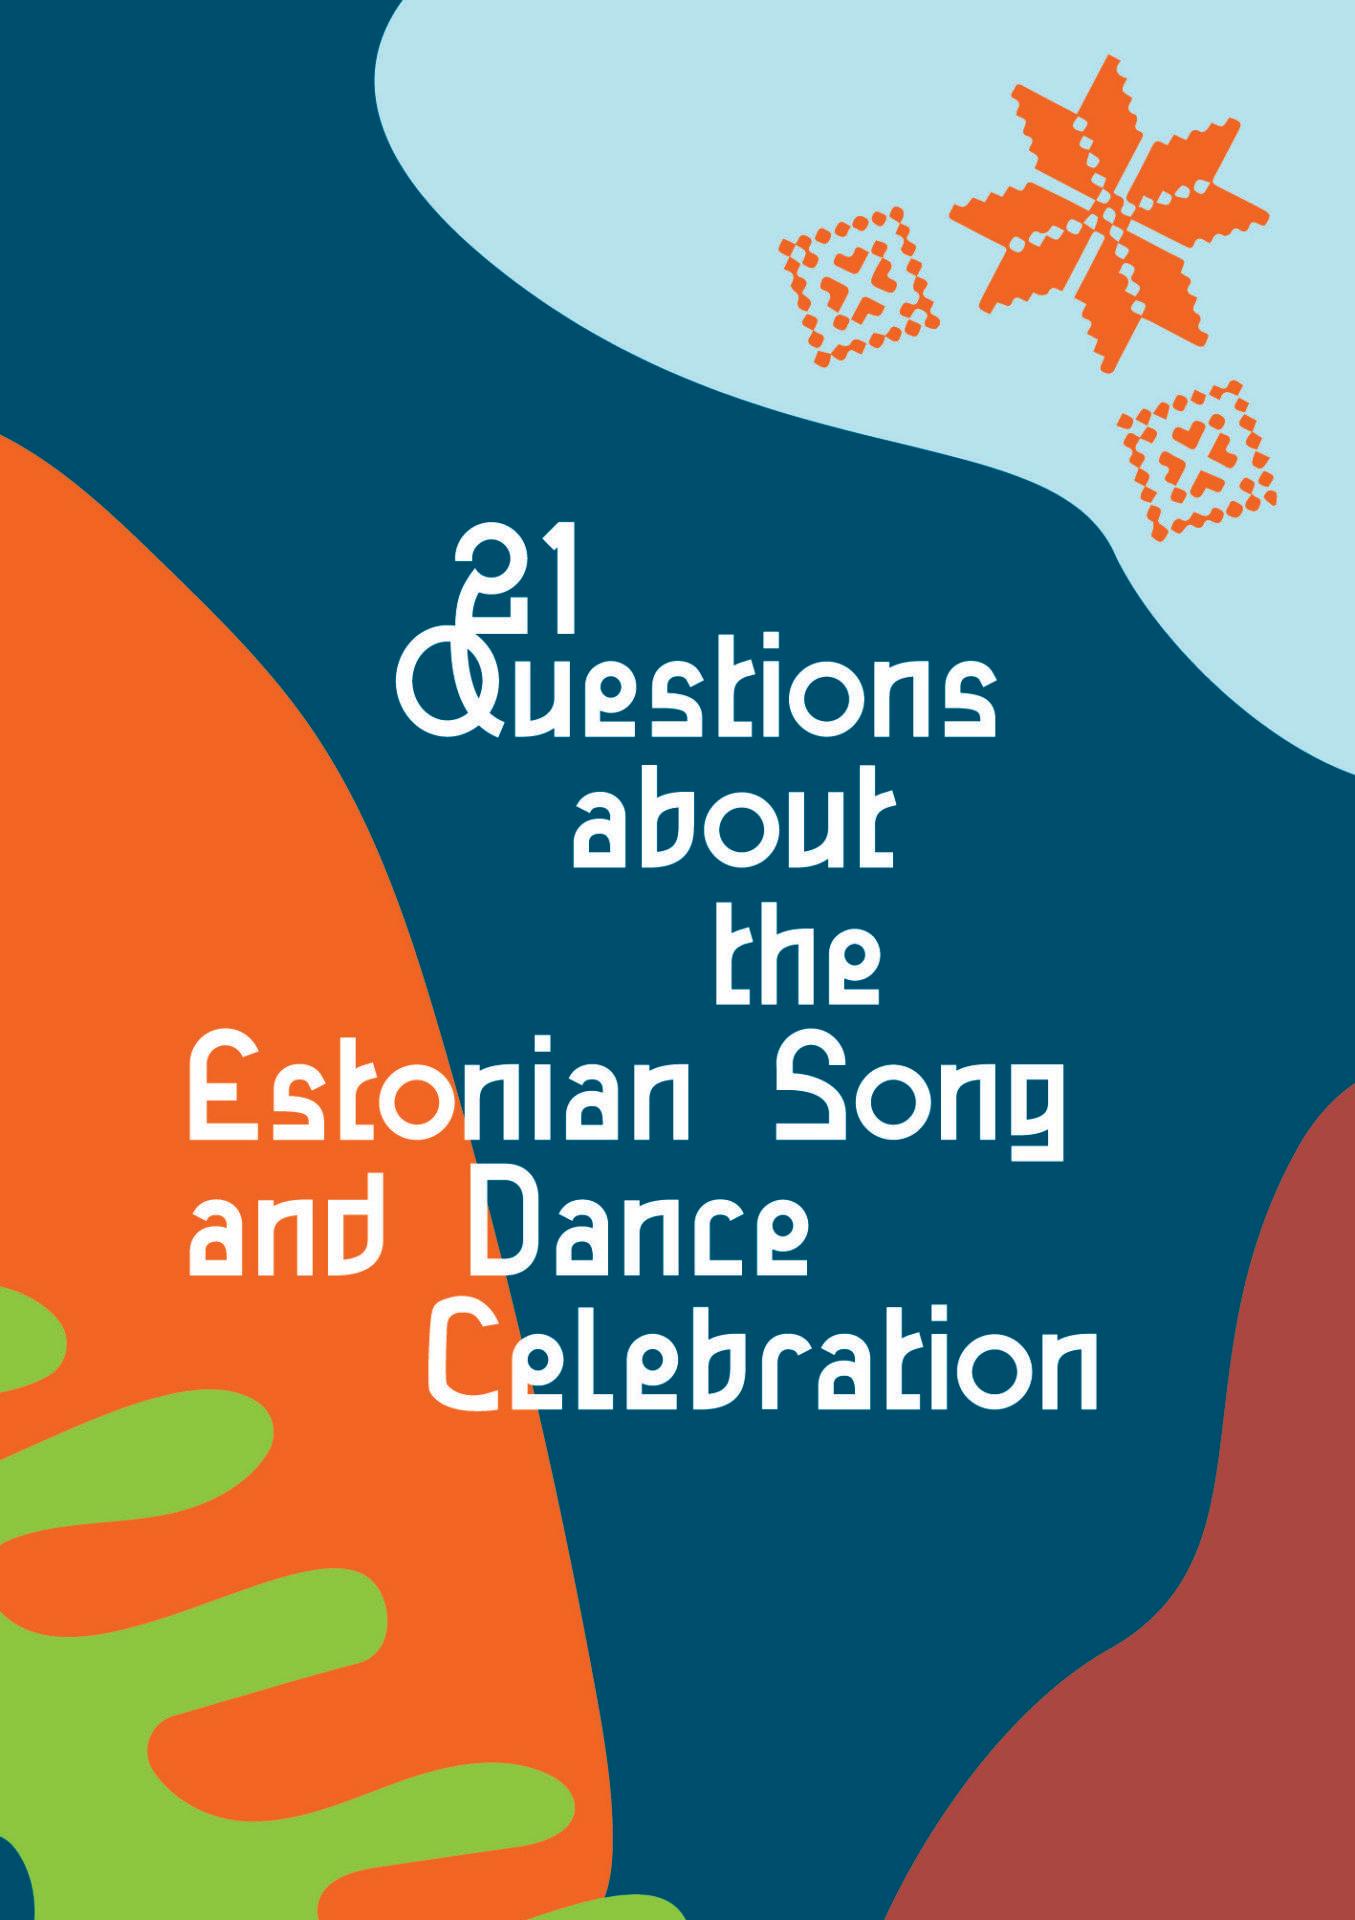 21 Questions About The Estonian Song and Dance Celebration